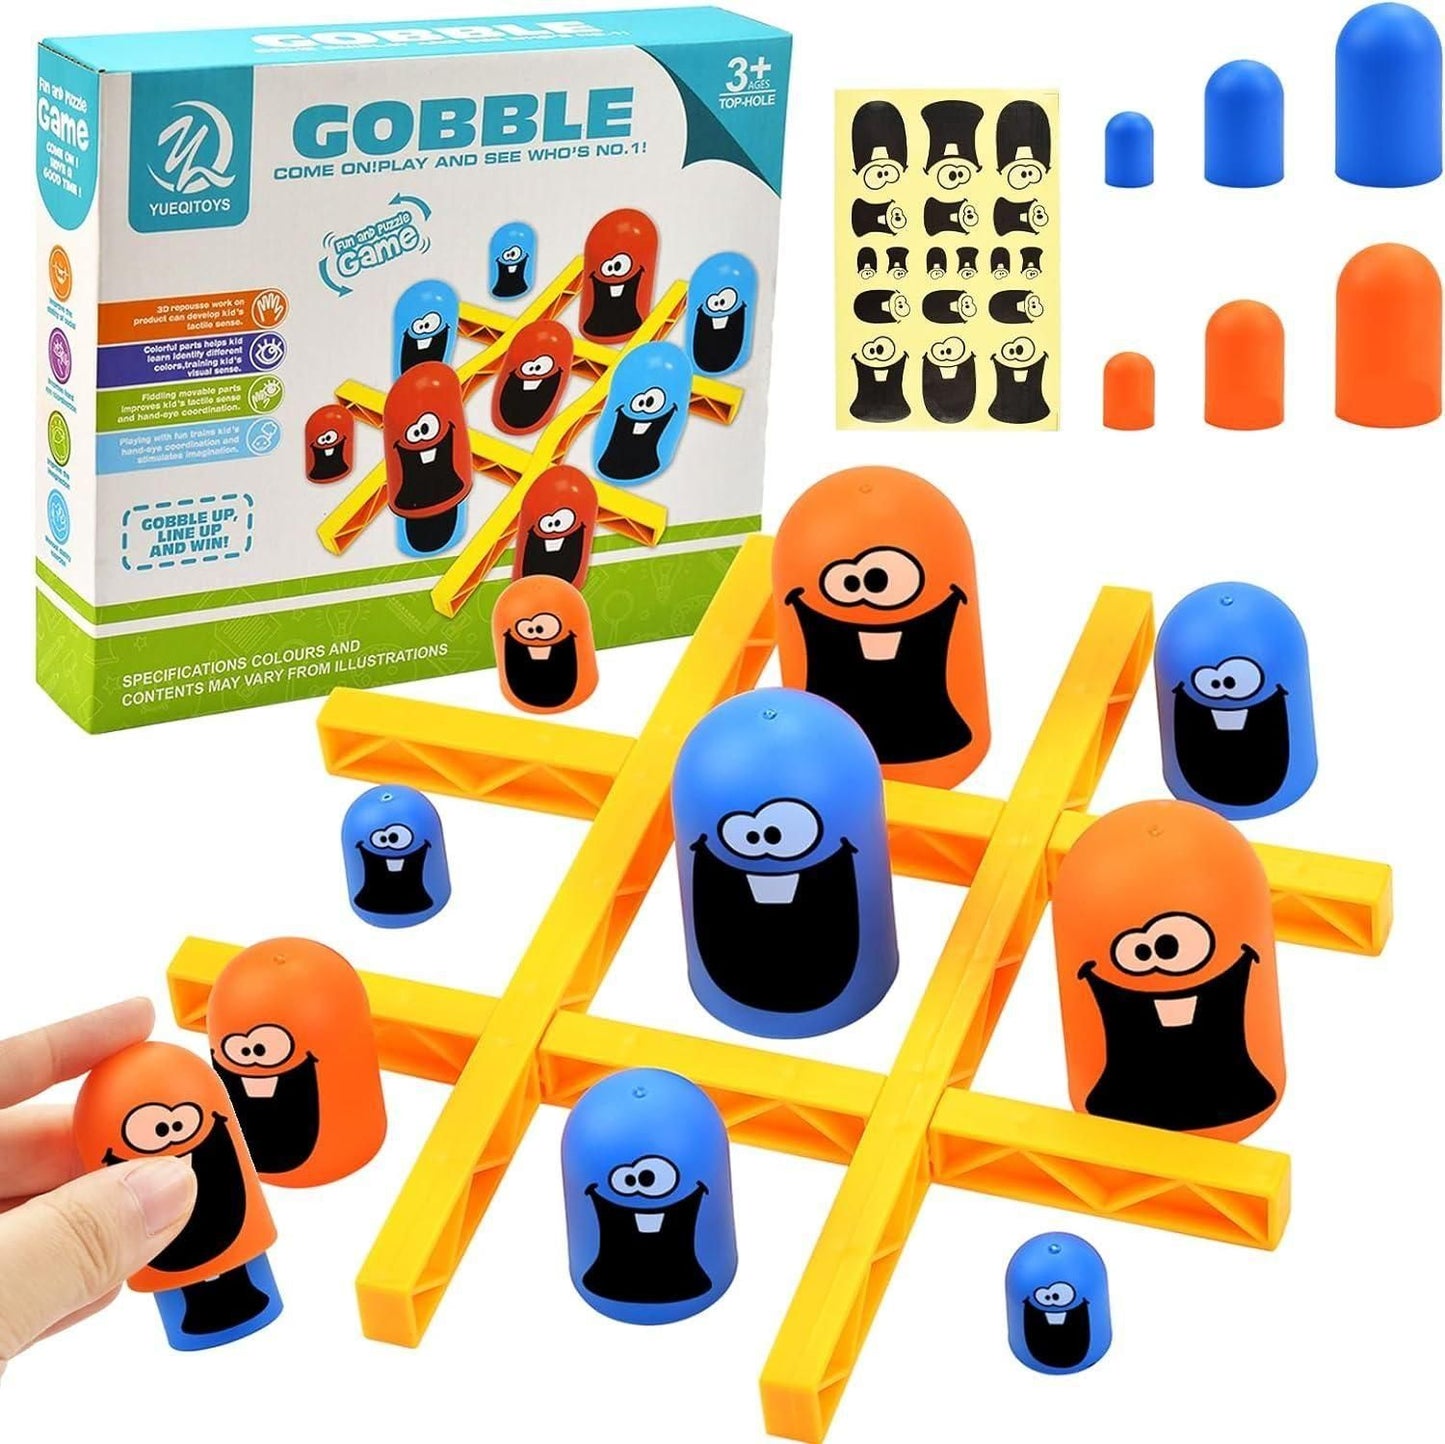 Gobble Board Game Fun and Strategic Interactive Toy